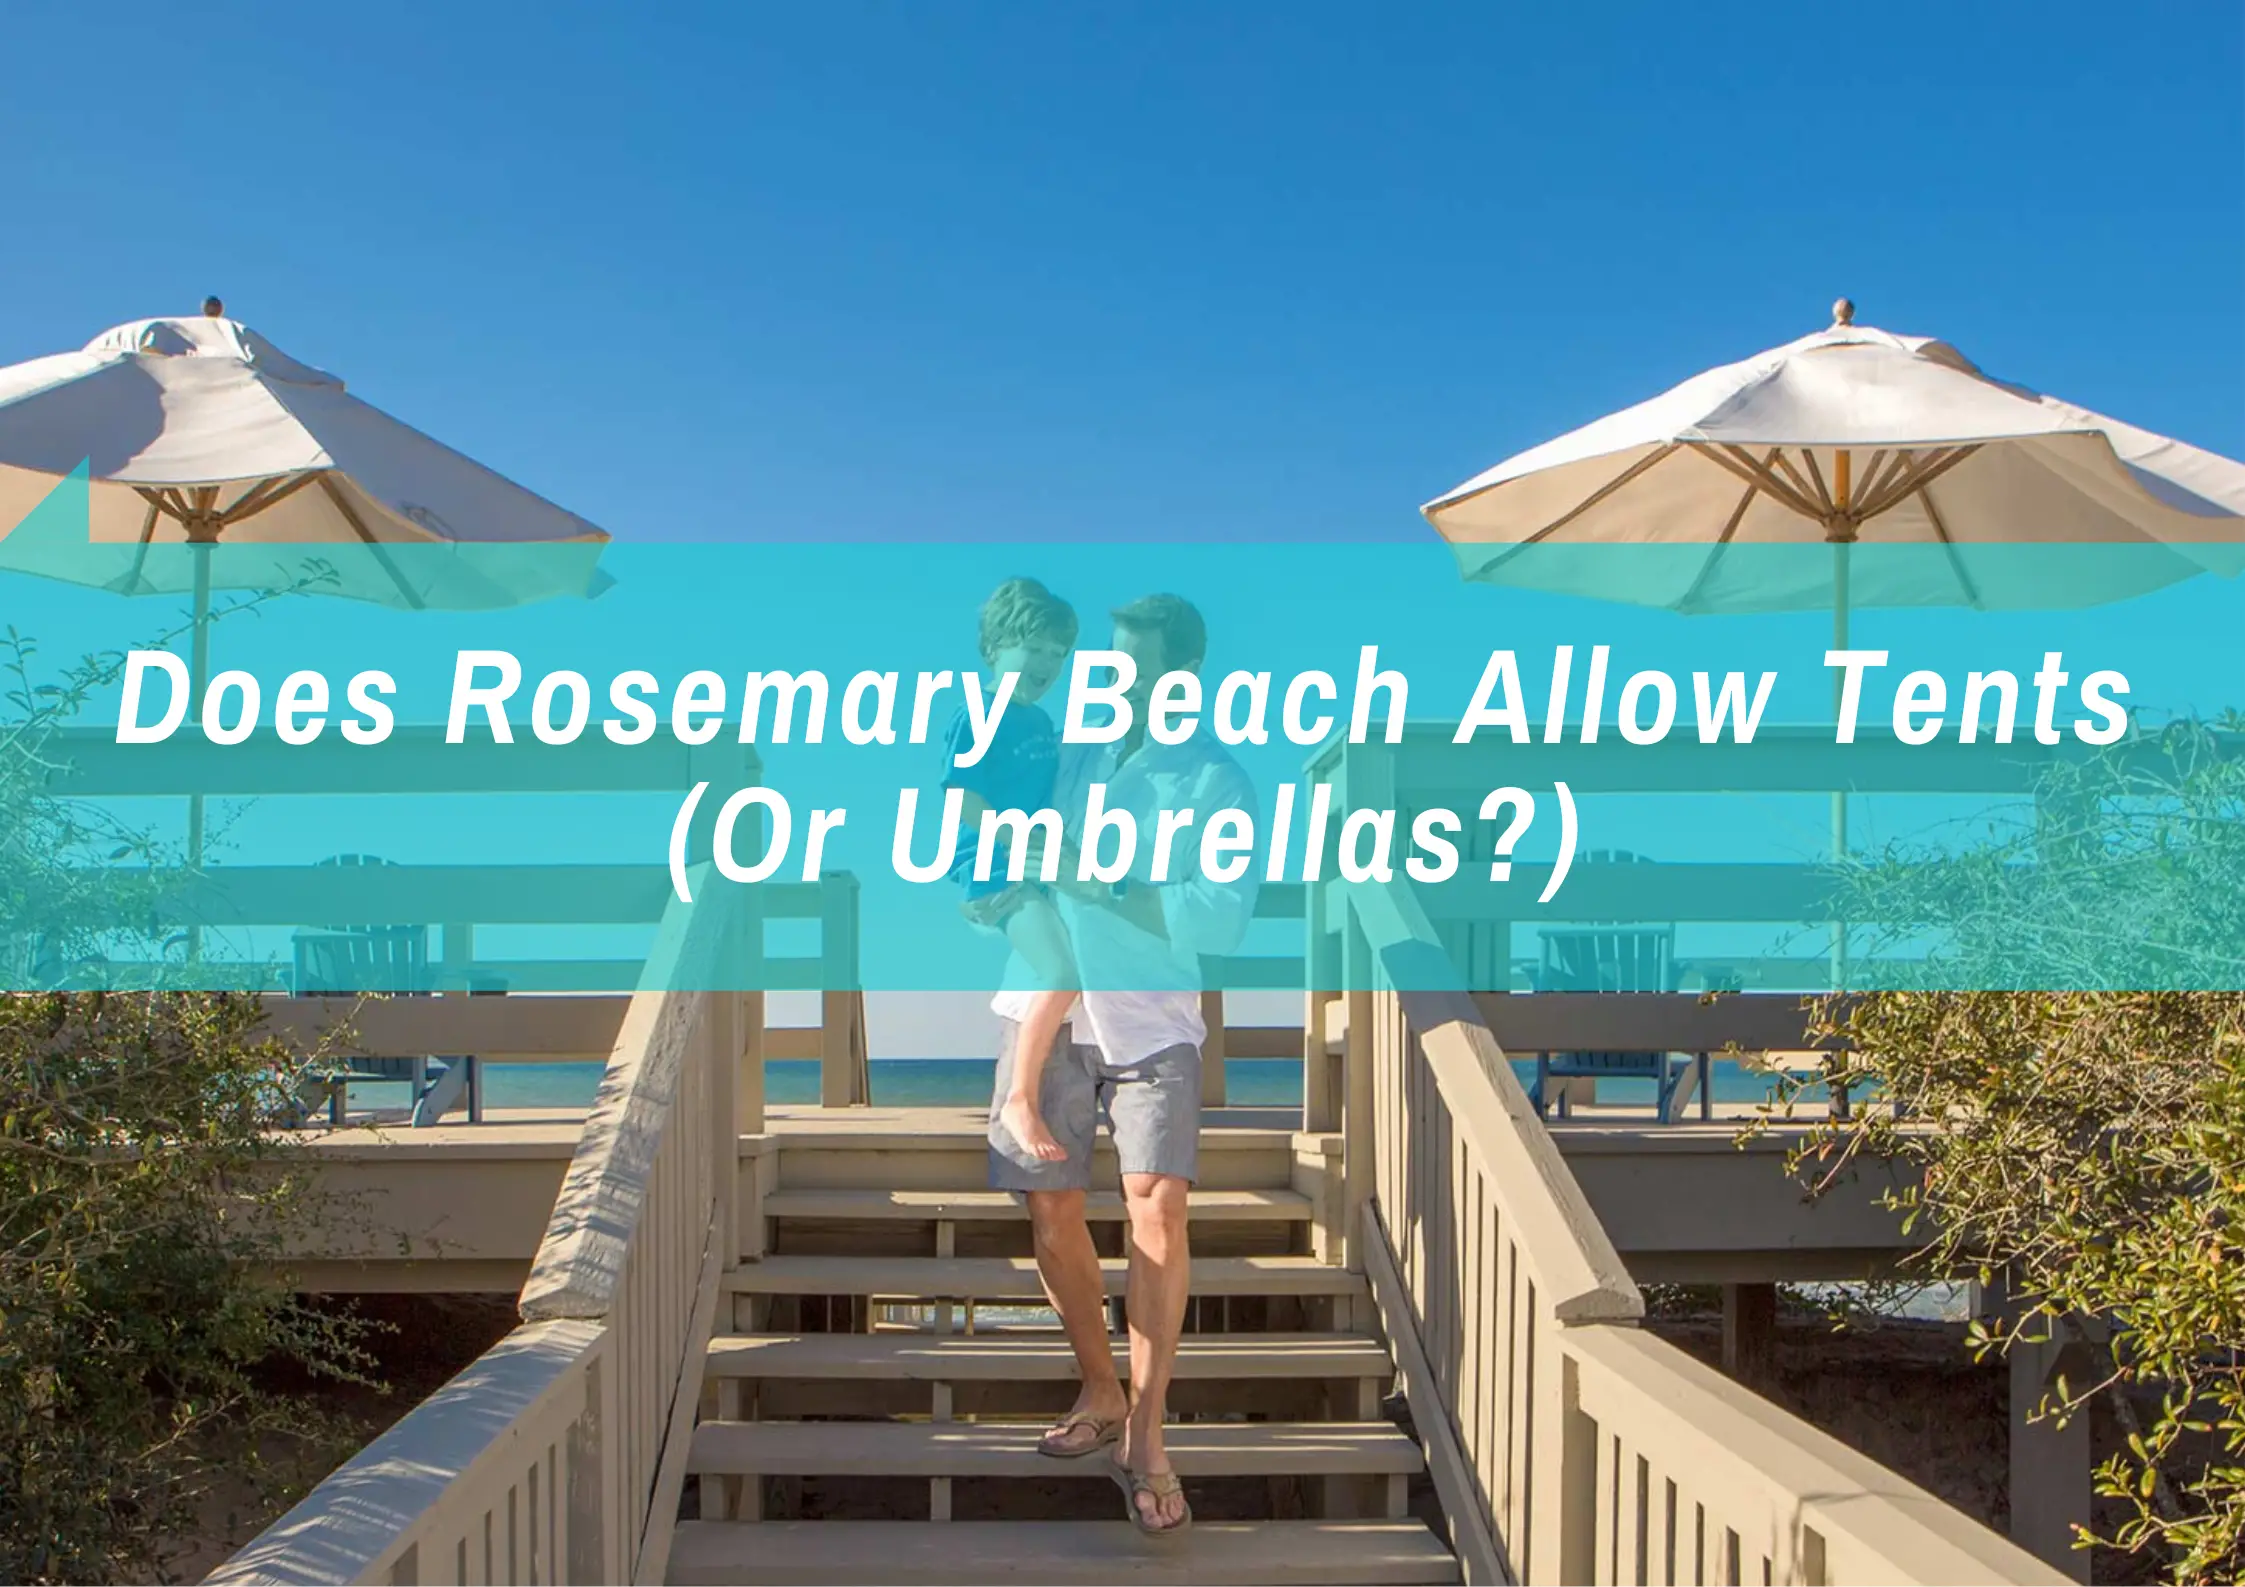 You are currently viewing Does Rosemary Beach Allow Tents (Or Umbrellas?)